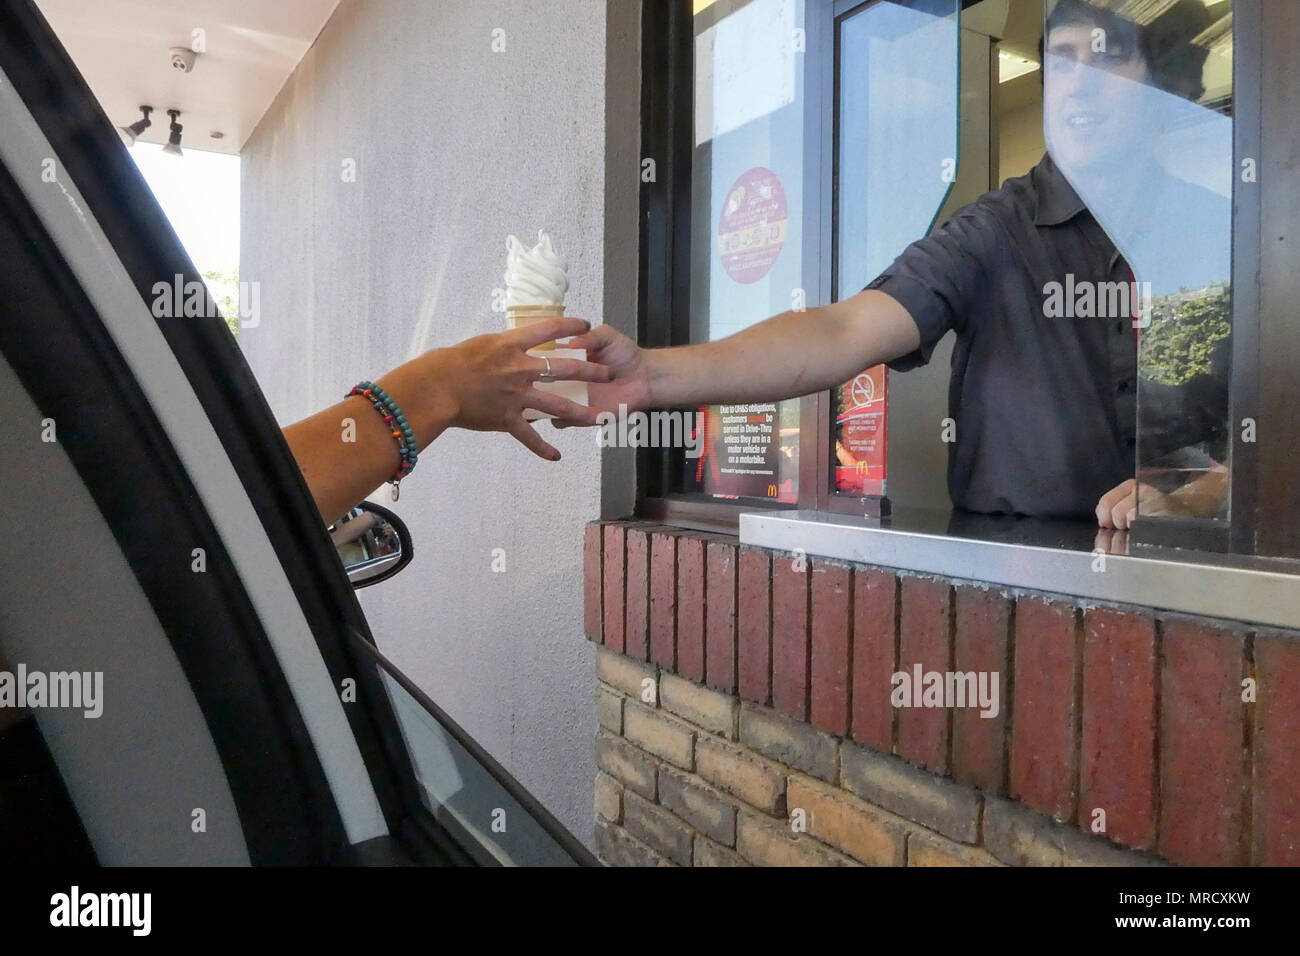 Melbourne, Australia: March 2017: Unidentified customer receiving a McFlurry ice cream at a McDonald's drive through window. Stock Photo